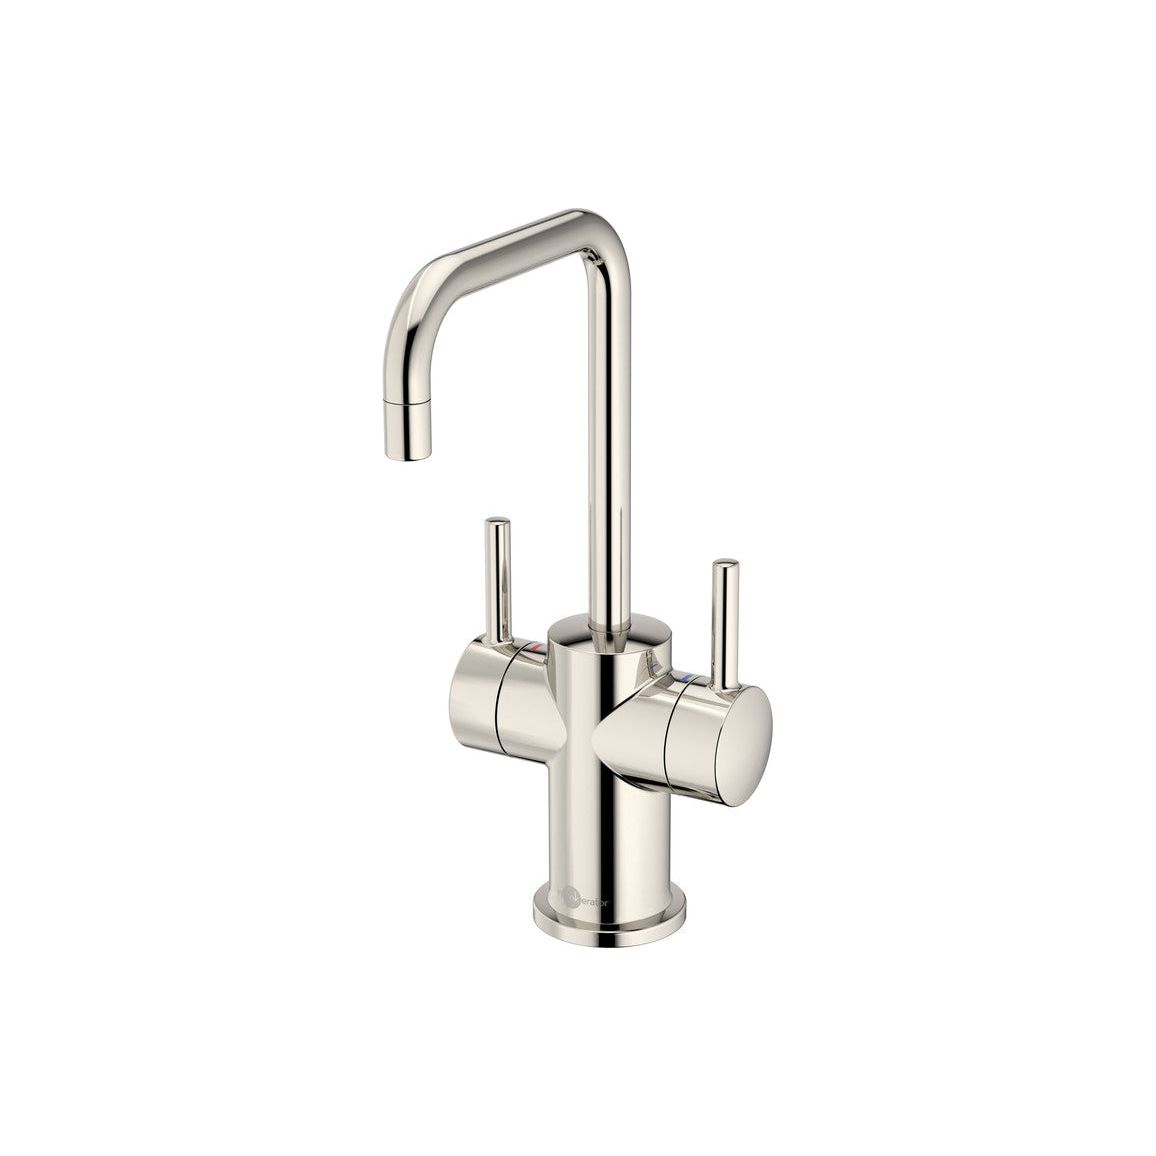 InSinkErator FHC3020 Hot/Cold Water Mixer Tap & Neo Tank - Polished Nickel